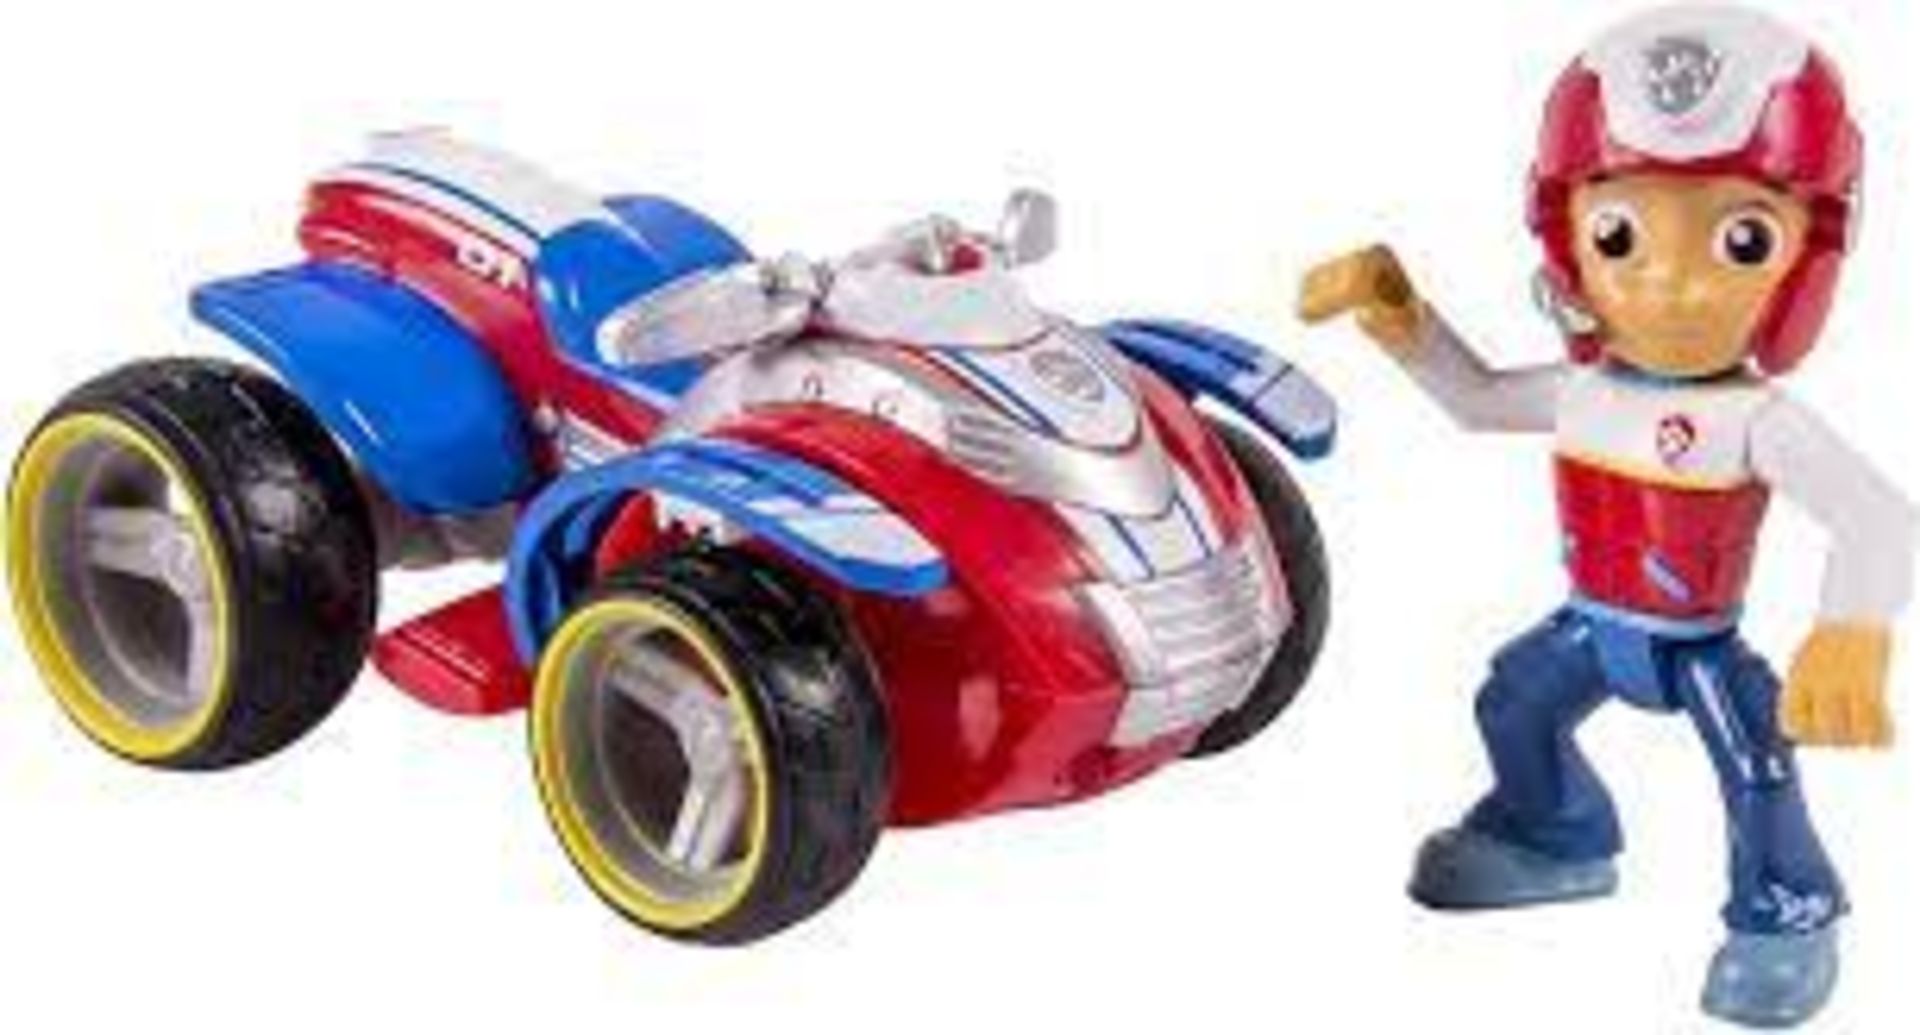 RRP - £11.99 PAW Patrol Ryders Rescue ATV Vehicle with Collectible Figure, for Kids Aged 3 and up